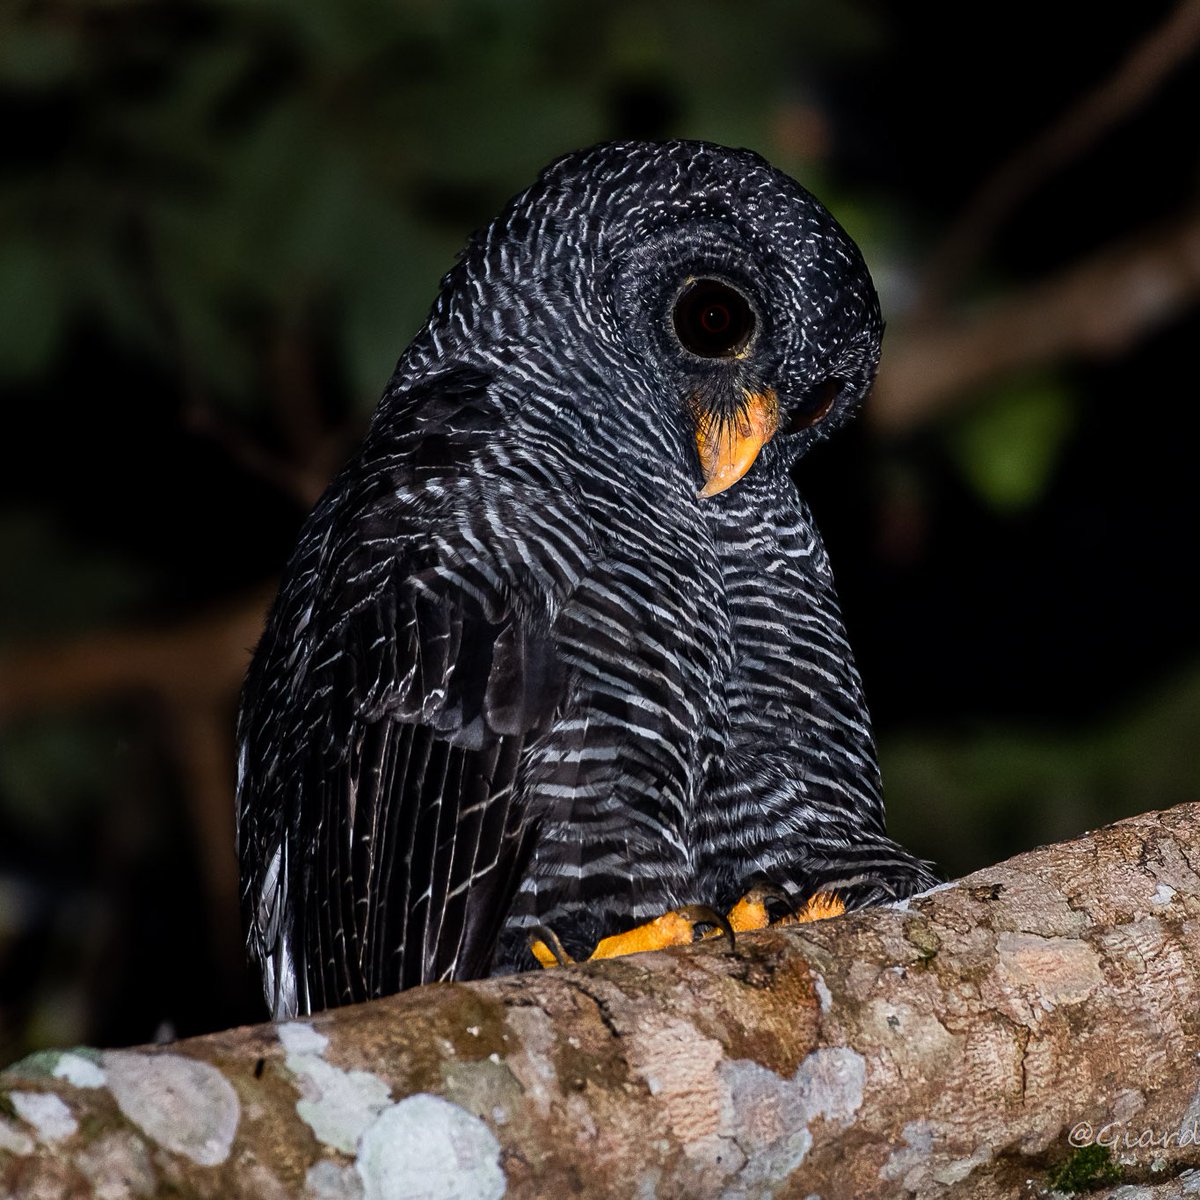 WHO? WHO WHO?
wants to #VisitPeru?
Black Banded Owl watching a group of tourists watching a black banded owl...
@PeruJungleLodge .
#visitperu #birdsing #birdwatching #ecolodge #ecotourism #peru #perutravel #BirdsSeenIn2023